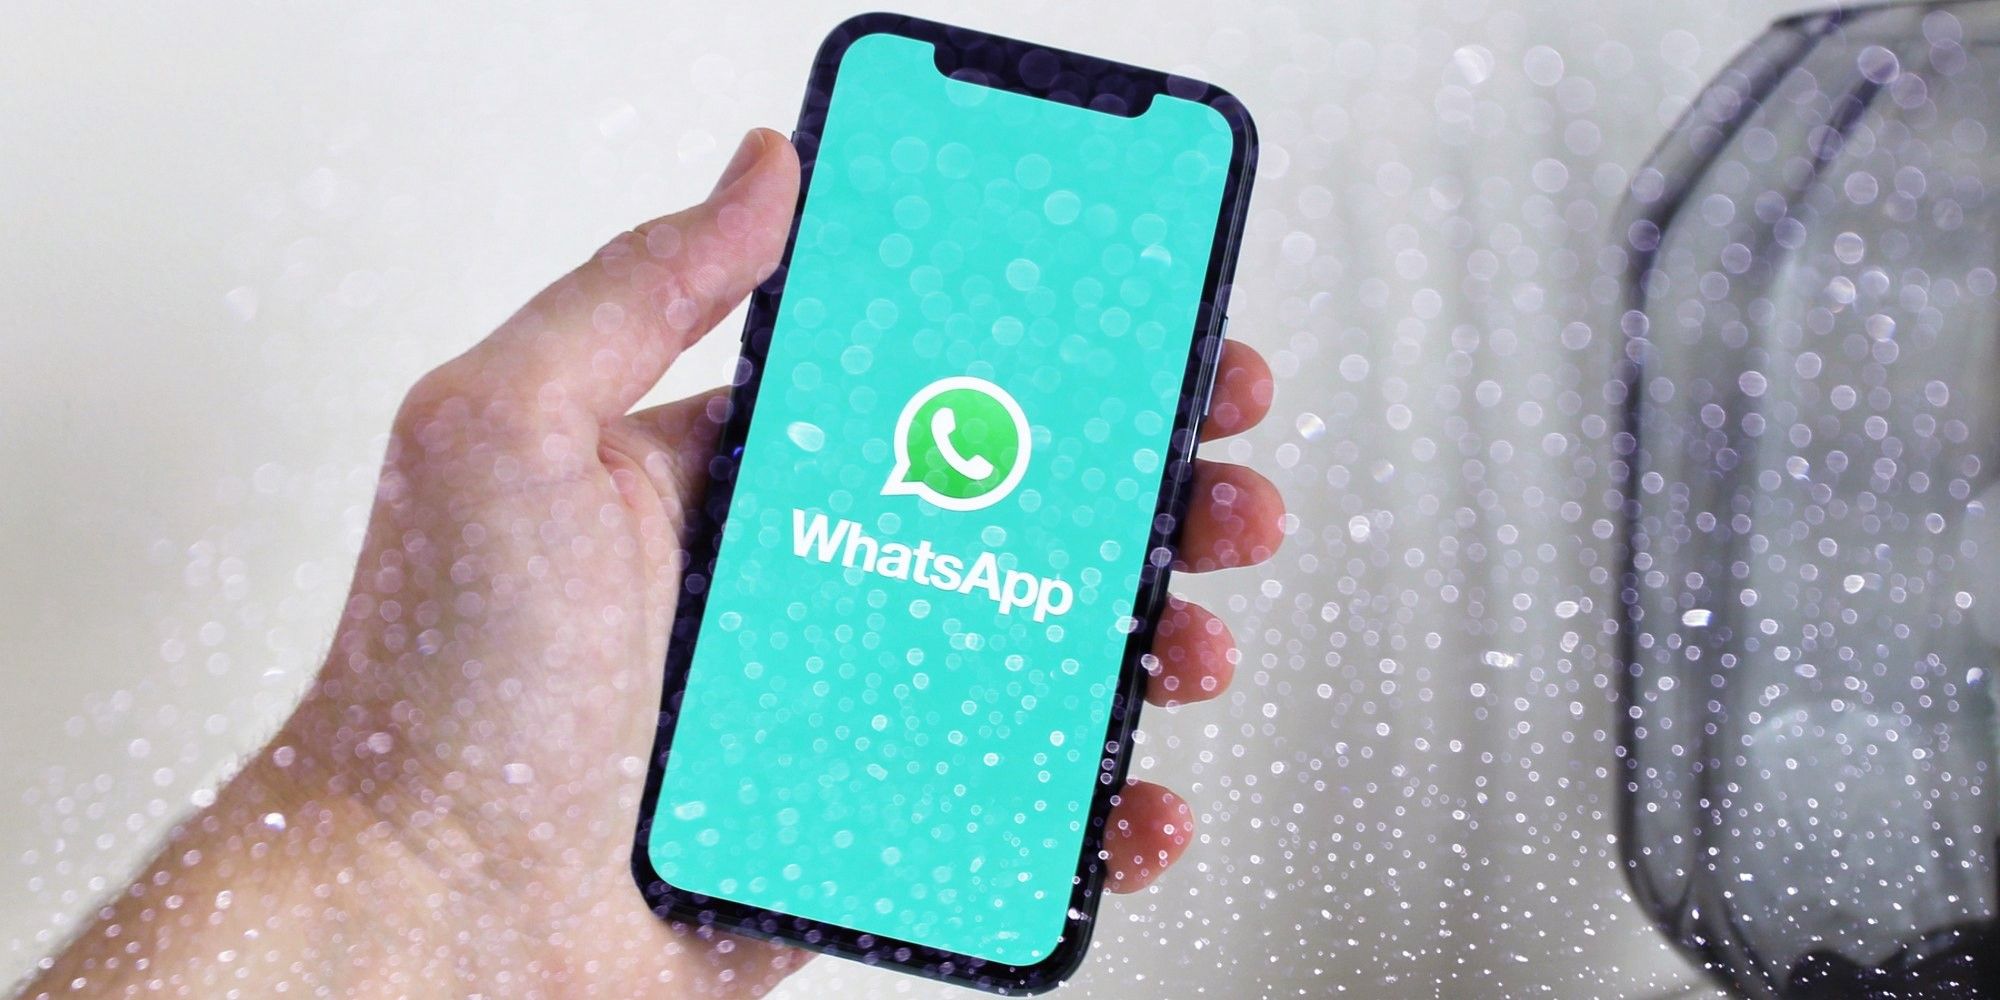 WhatsApp Knows More About User Conversations Than Previously Thought